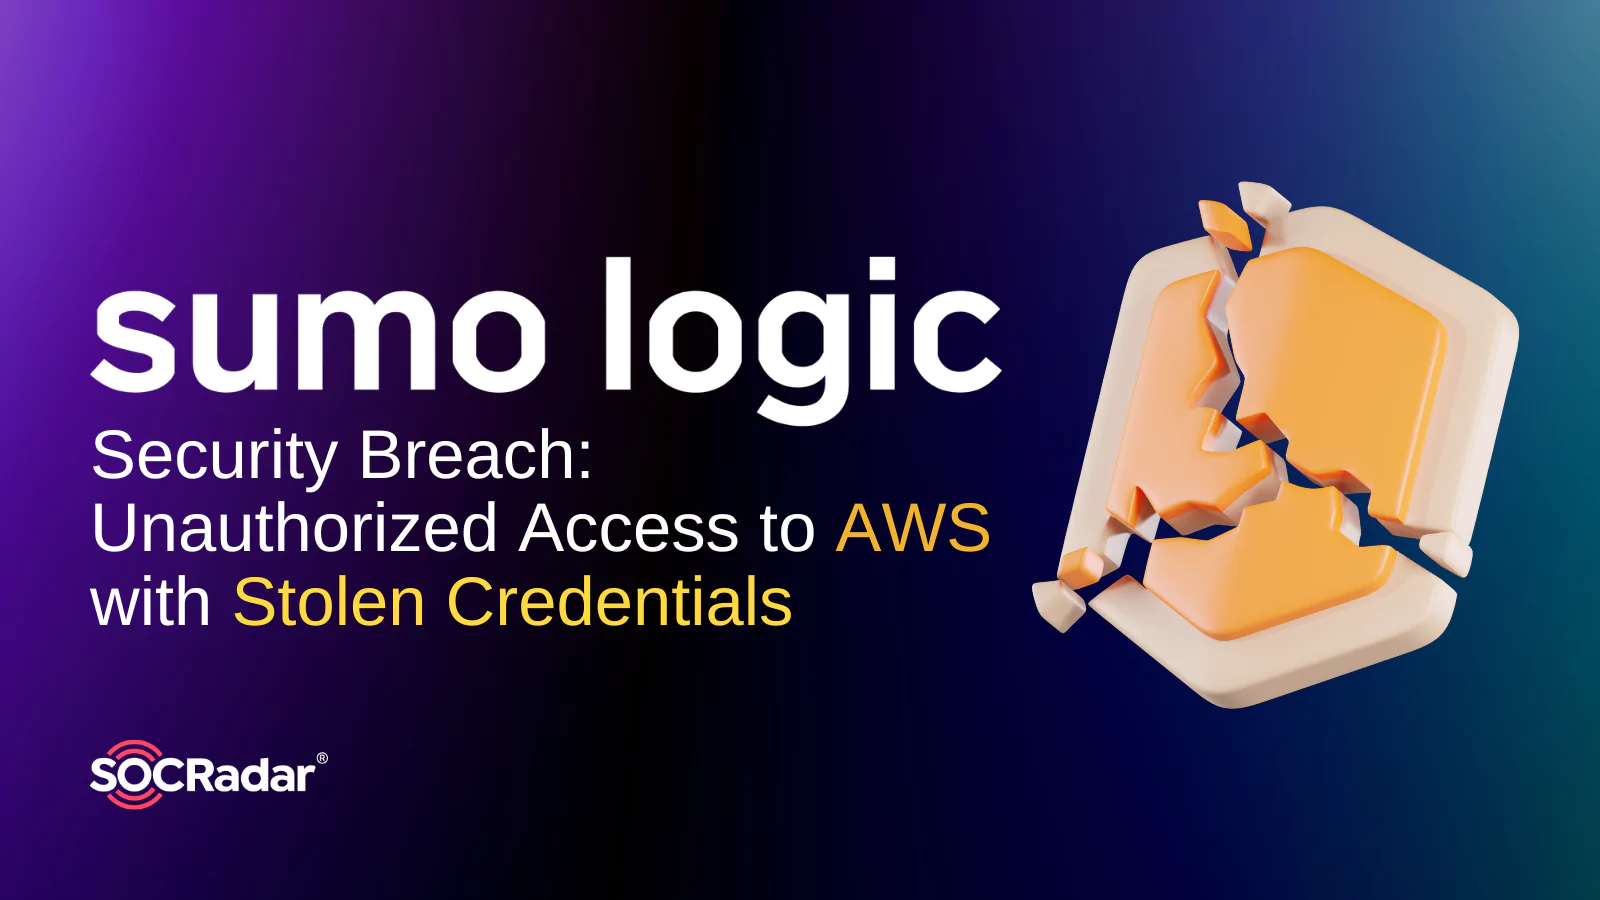 SOCRadar® Cyber Intelligence Inc. | Sumo Logic Security Breach: Unauthorized Access to AWS with Stolen Credentials